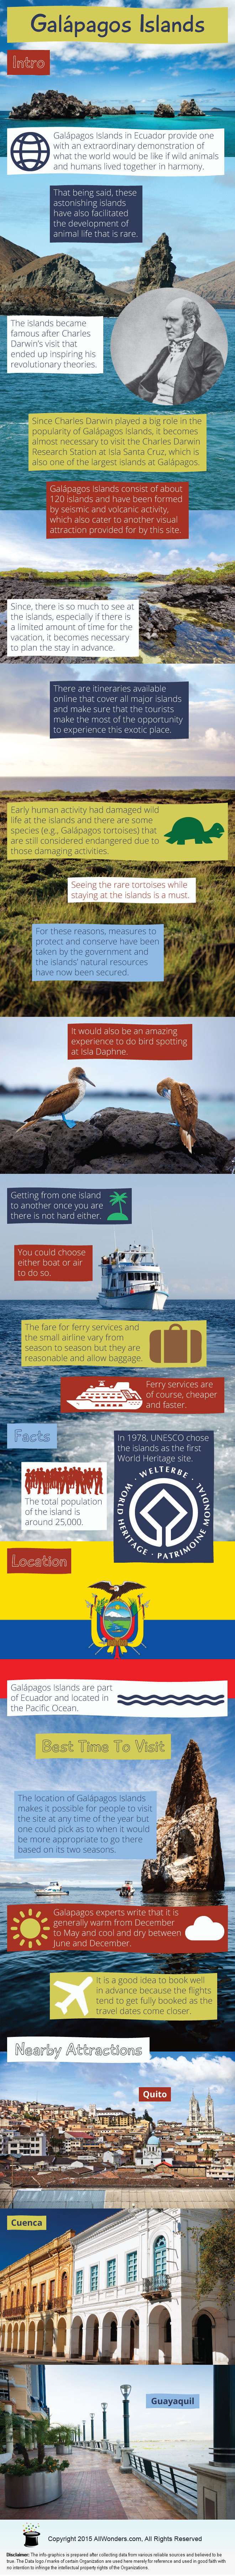 Galápagos Islands - Facts & Infographic